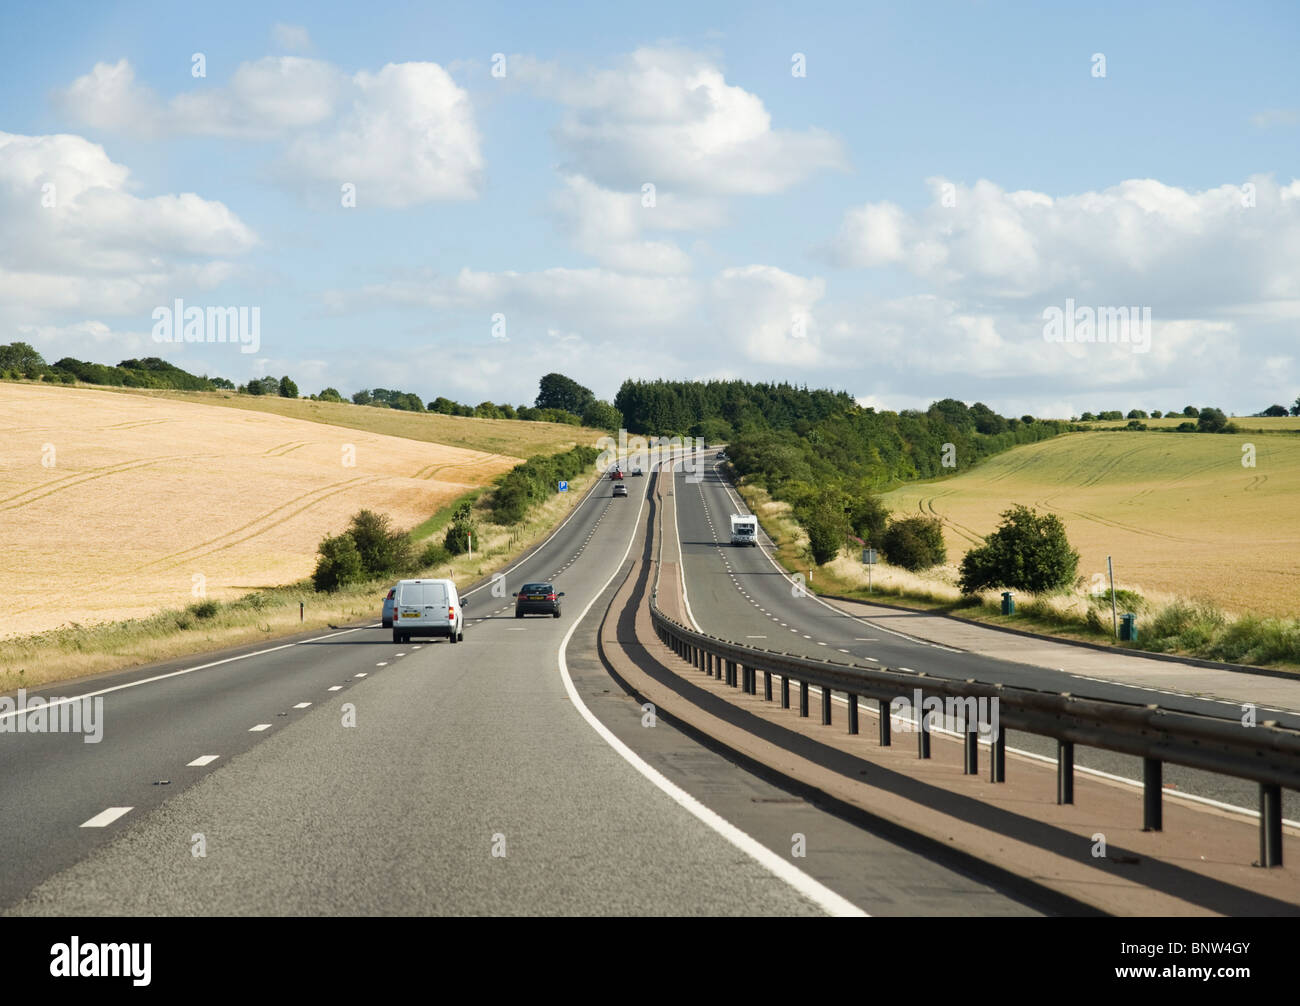 Cars on a dual carriageway road in Britain Stock Photo